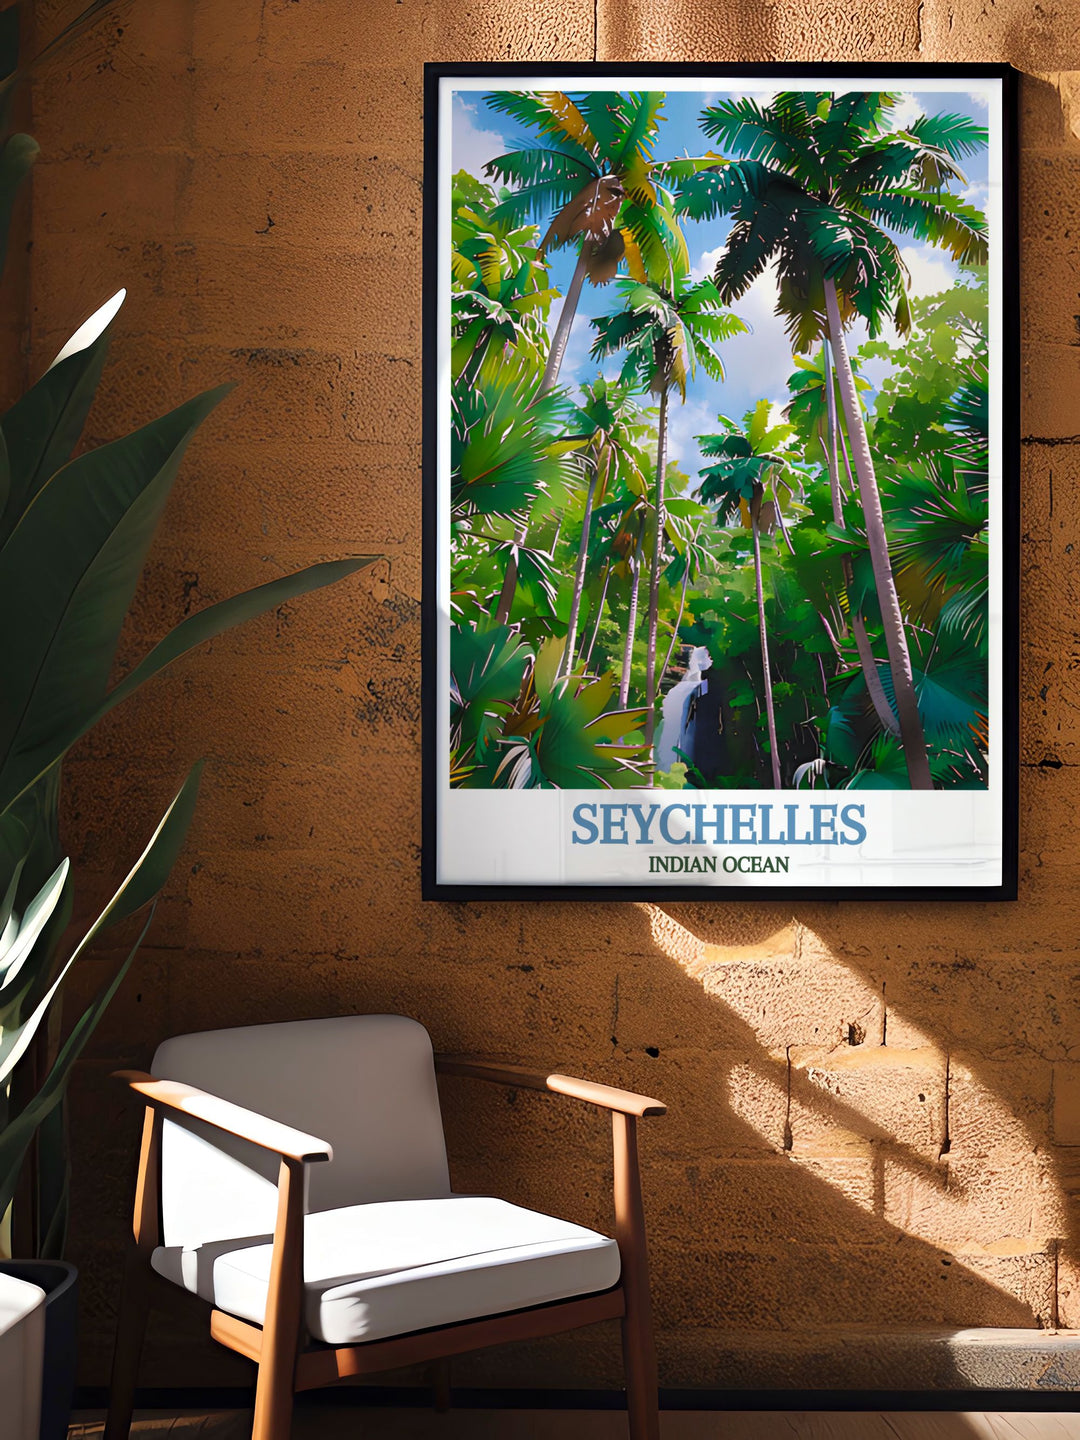 The iconic Vallée de Mai and the serene waters of the Indian Ocean are beautifully illustrated in this poster, offering a unique view of Seychelles, perfect for art lovers and travel enthusiasts.